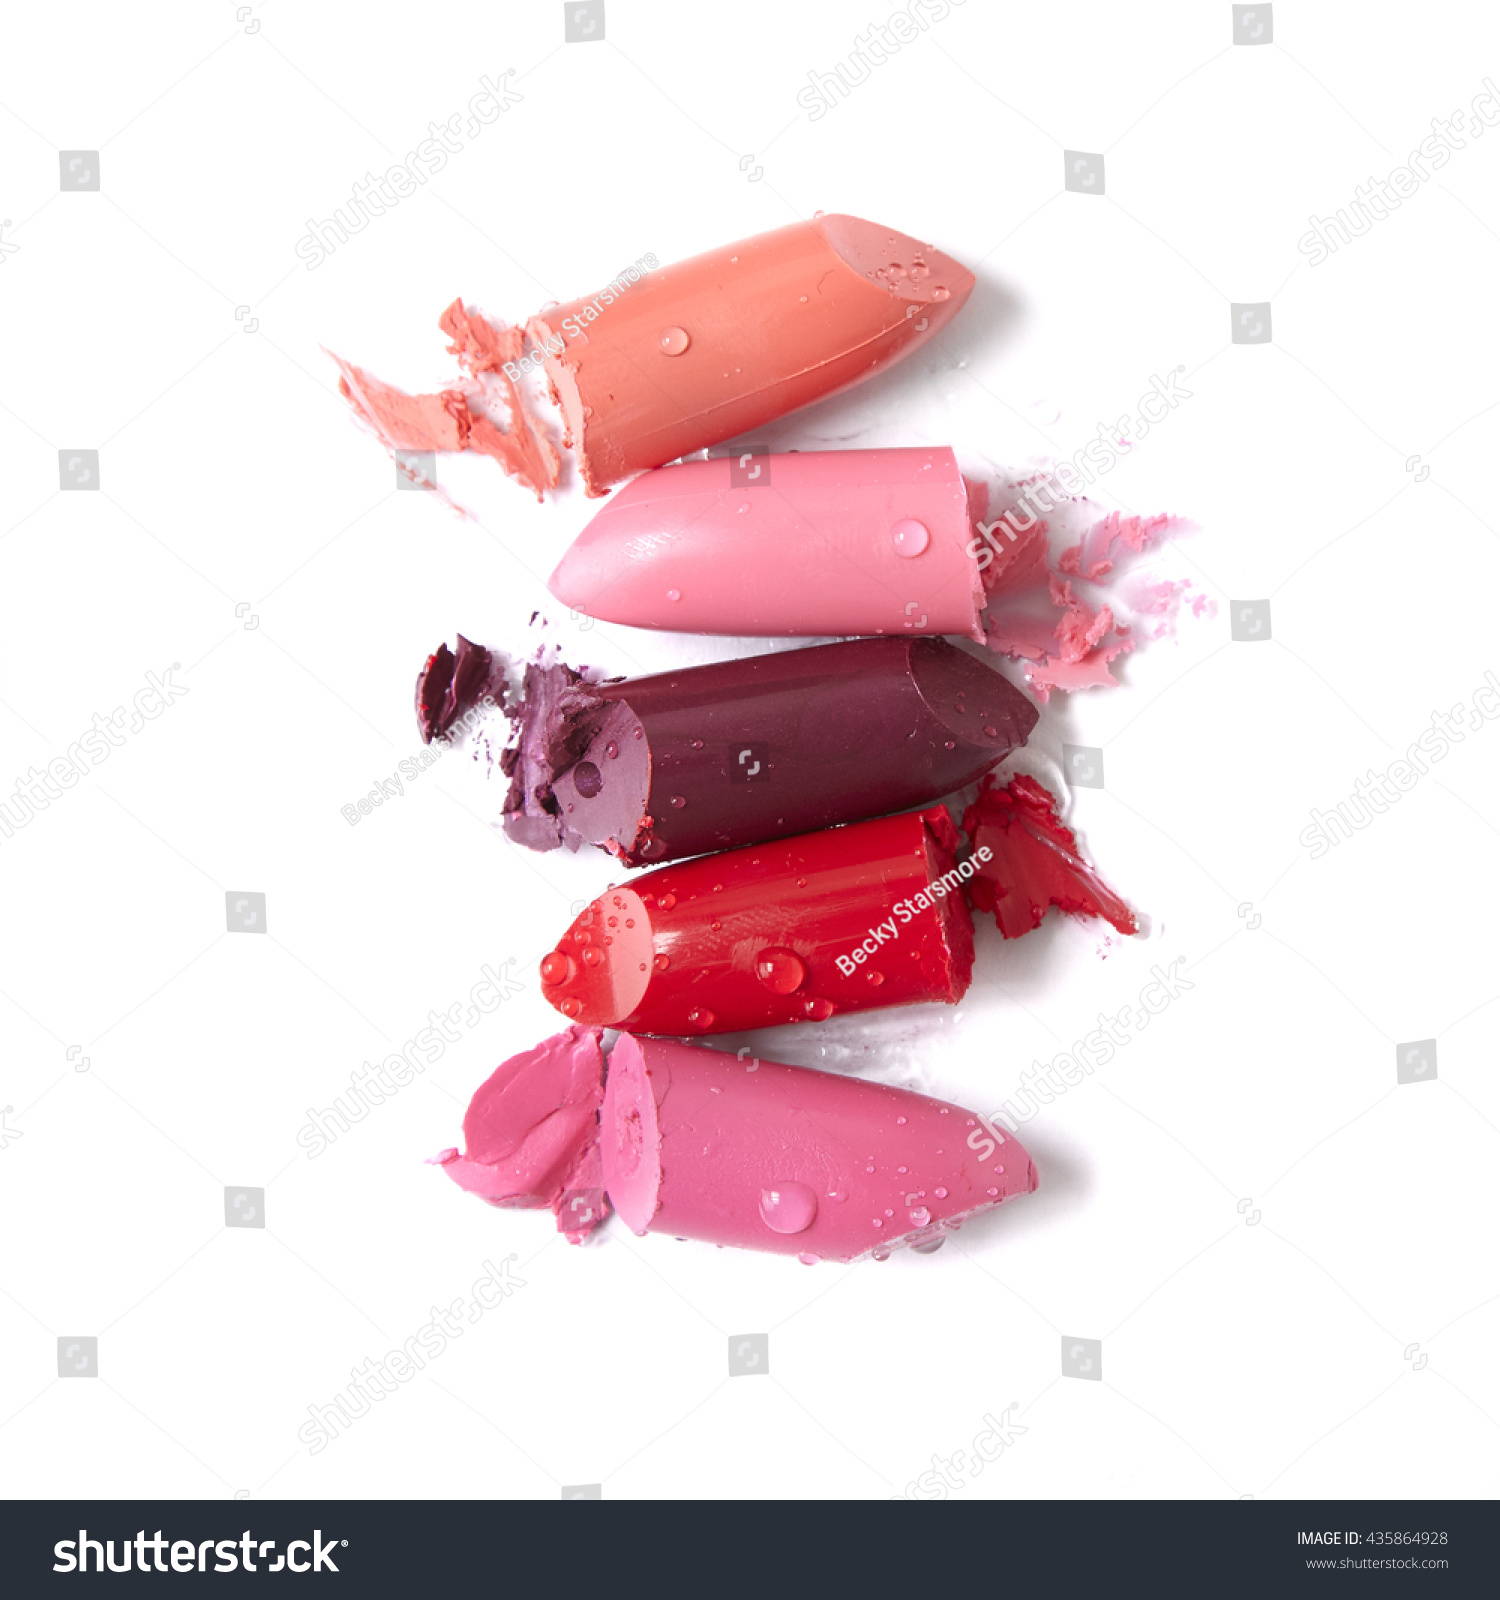 Broken lipstick make up isolated on a white background #435864928